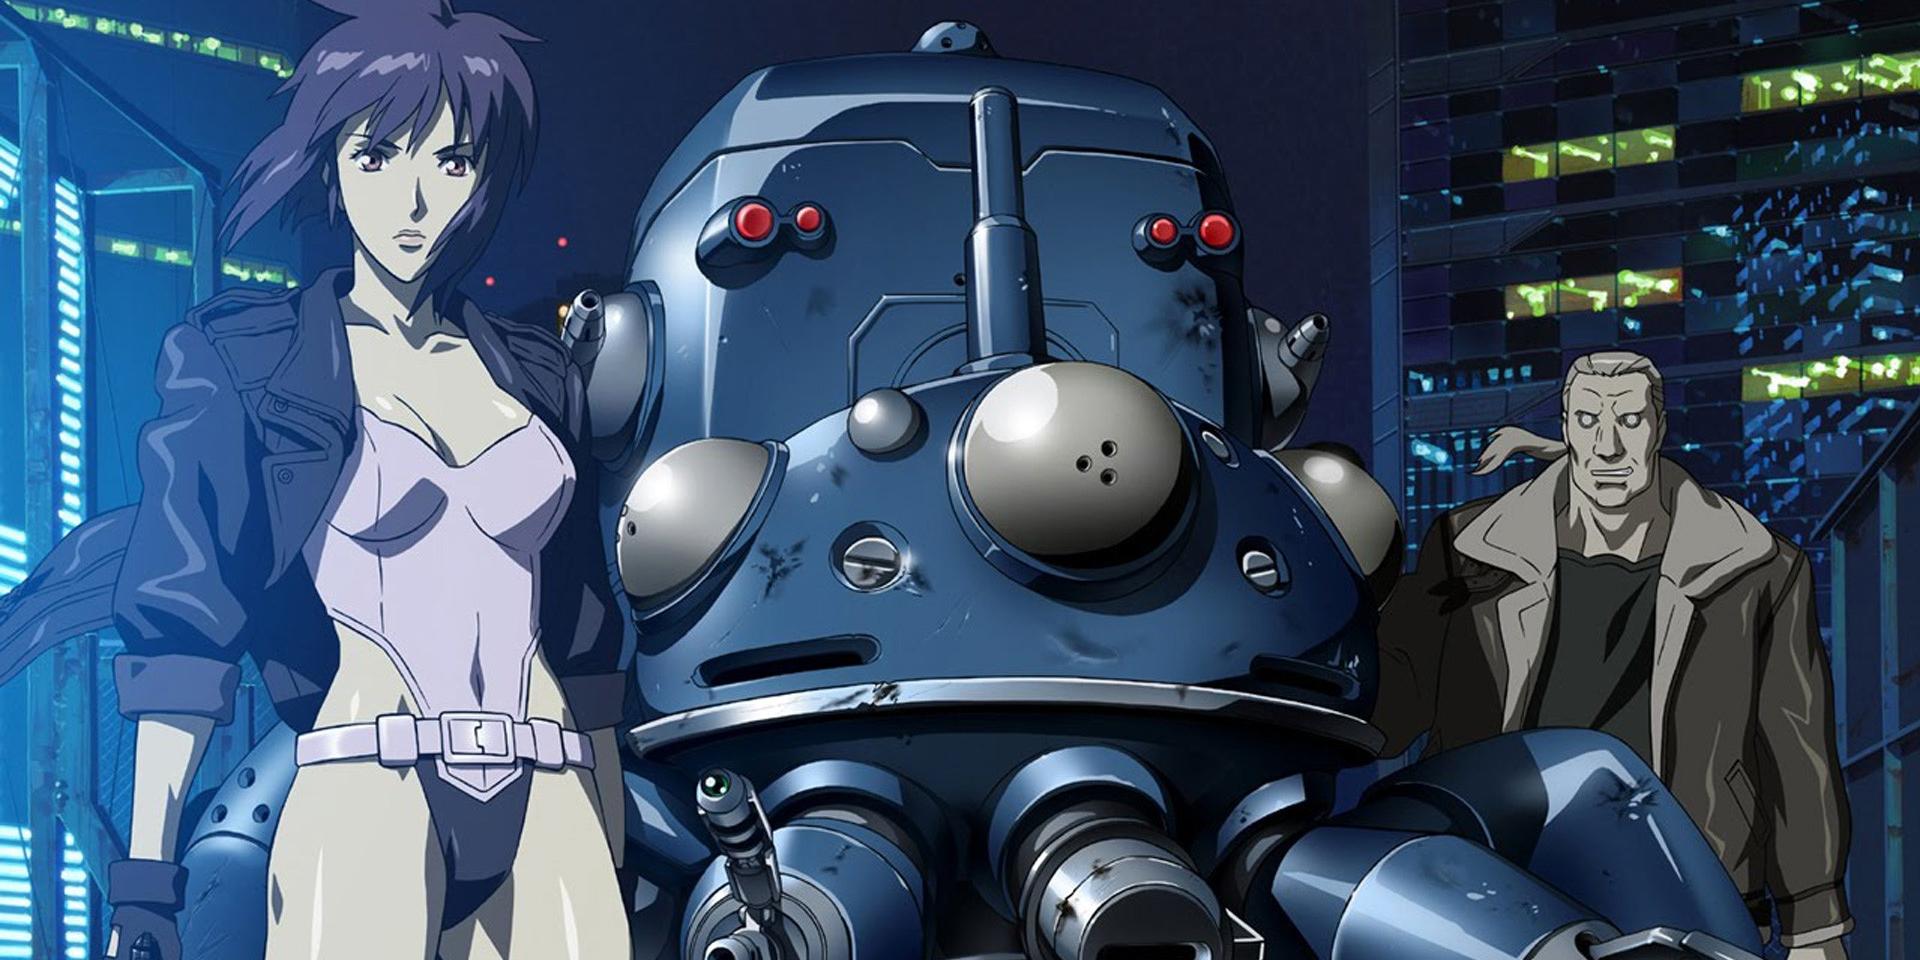 Xem phim Ghost in the Shell: Stand Alone Complex - Solid State Society - Koukaku Kidoutai Stand Alone Complex - Solid State Society | Koukaku Kidoutai Stand Alone Complex: Solid State Society | GitS SAC SSS | GitS: SAC 3 | gits sac3 | gitssac3 | sac3, sss, Ghost in the Shell S.A.C. Solid State Society Vietsub